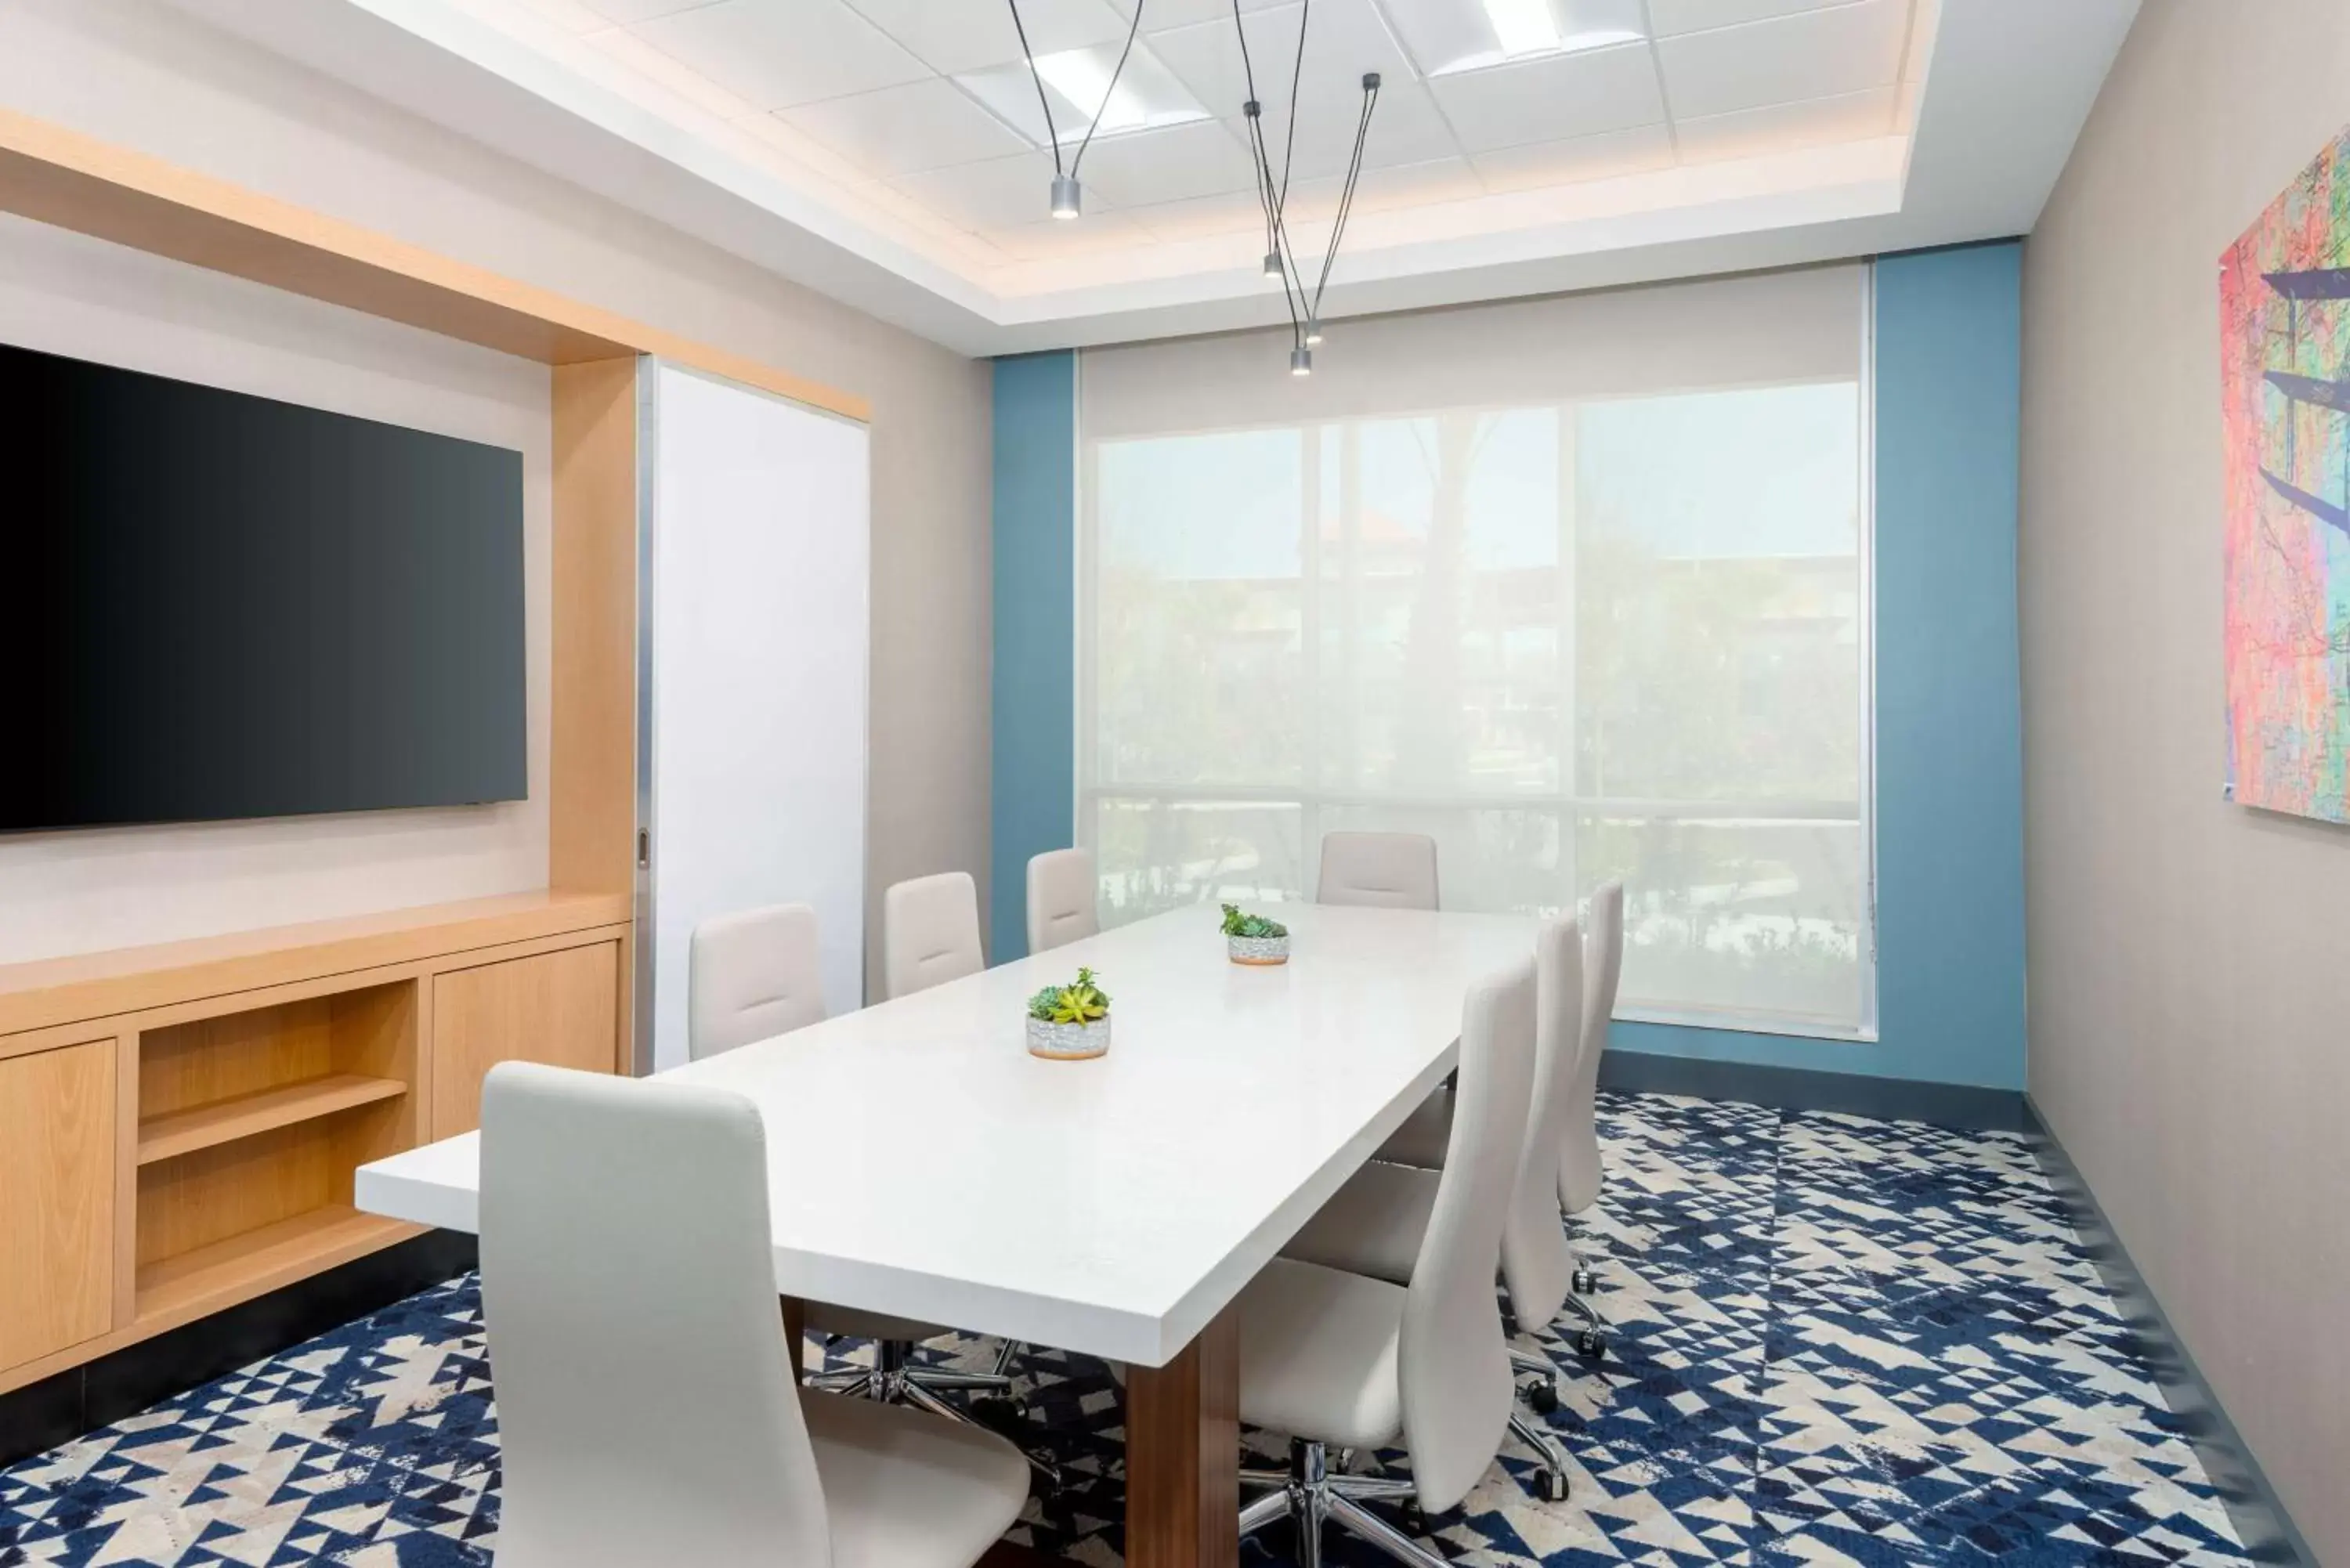 Meeting/conference room in Hyatt House Orlando Airport